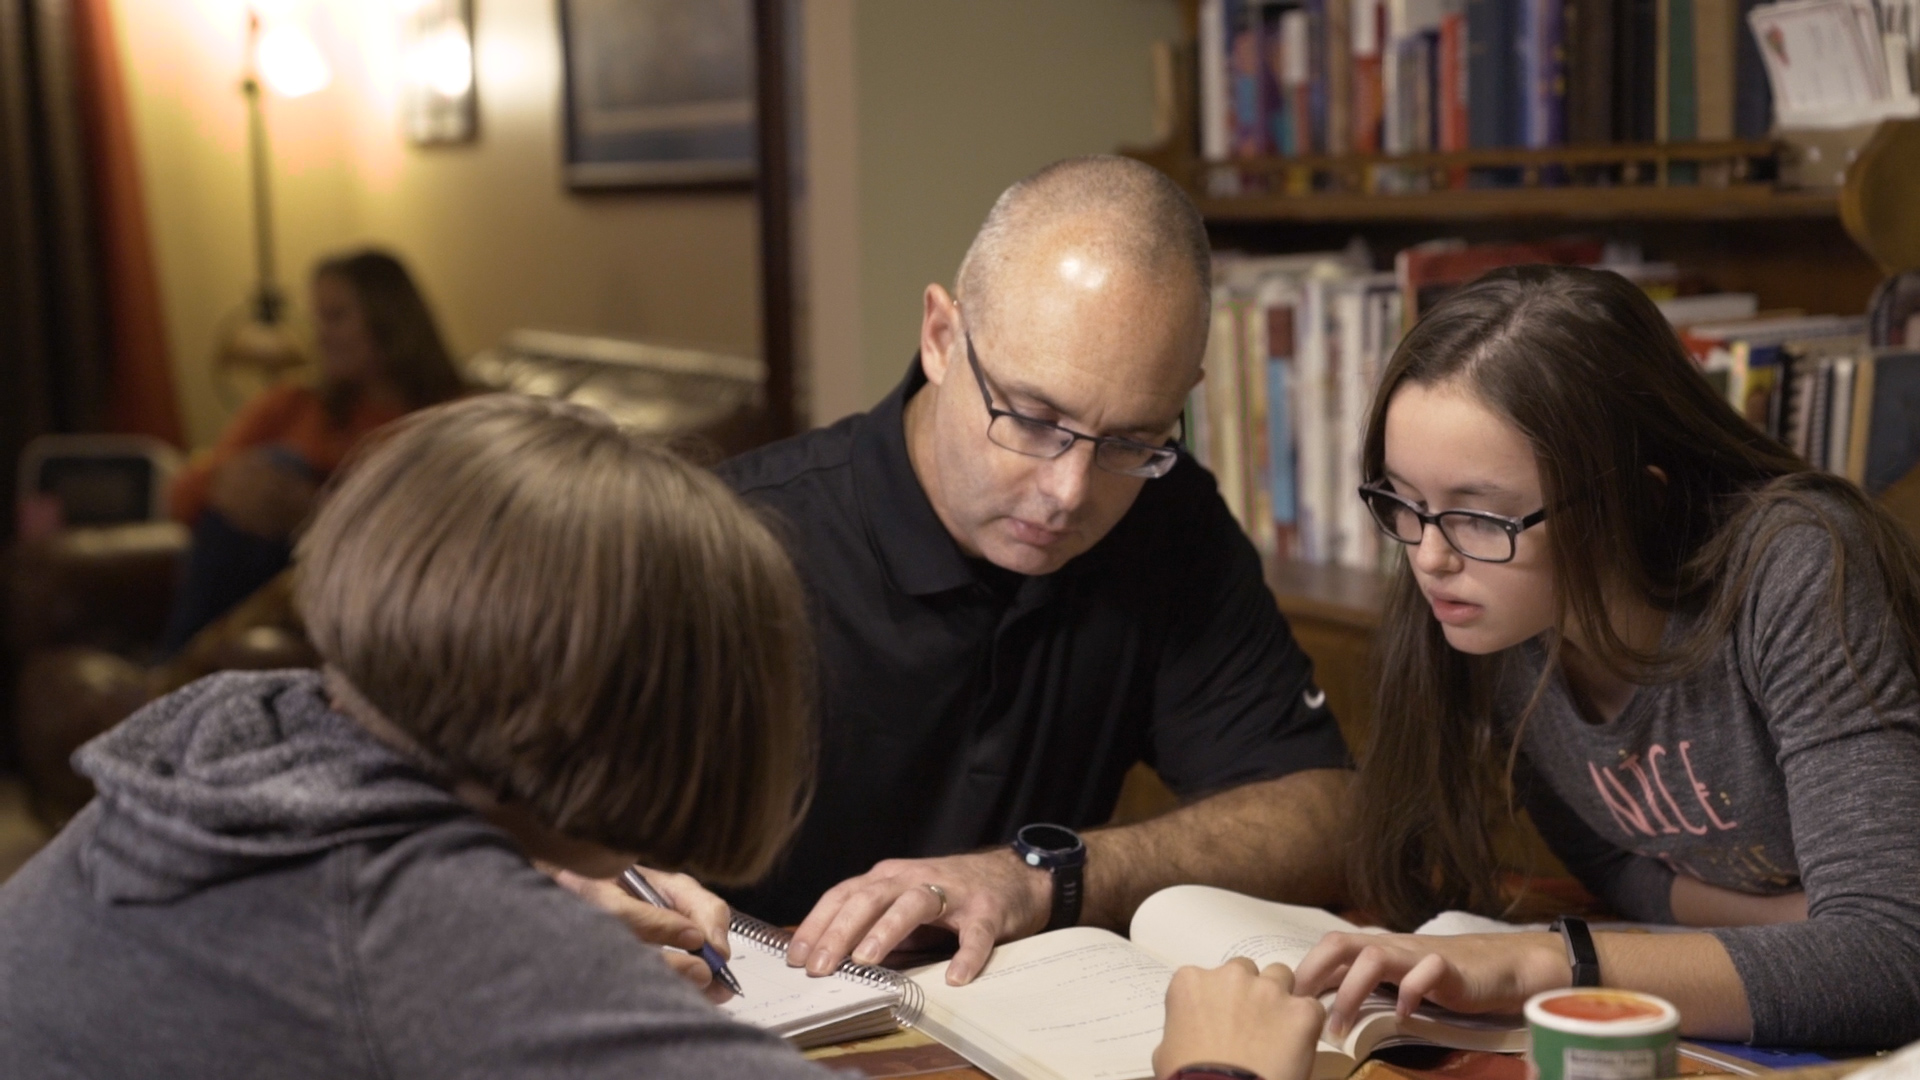 UofL online learning student David Beumer studying at home with family.